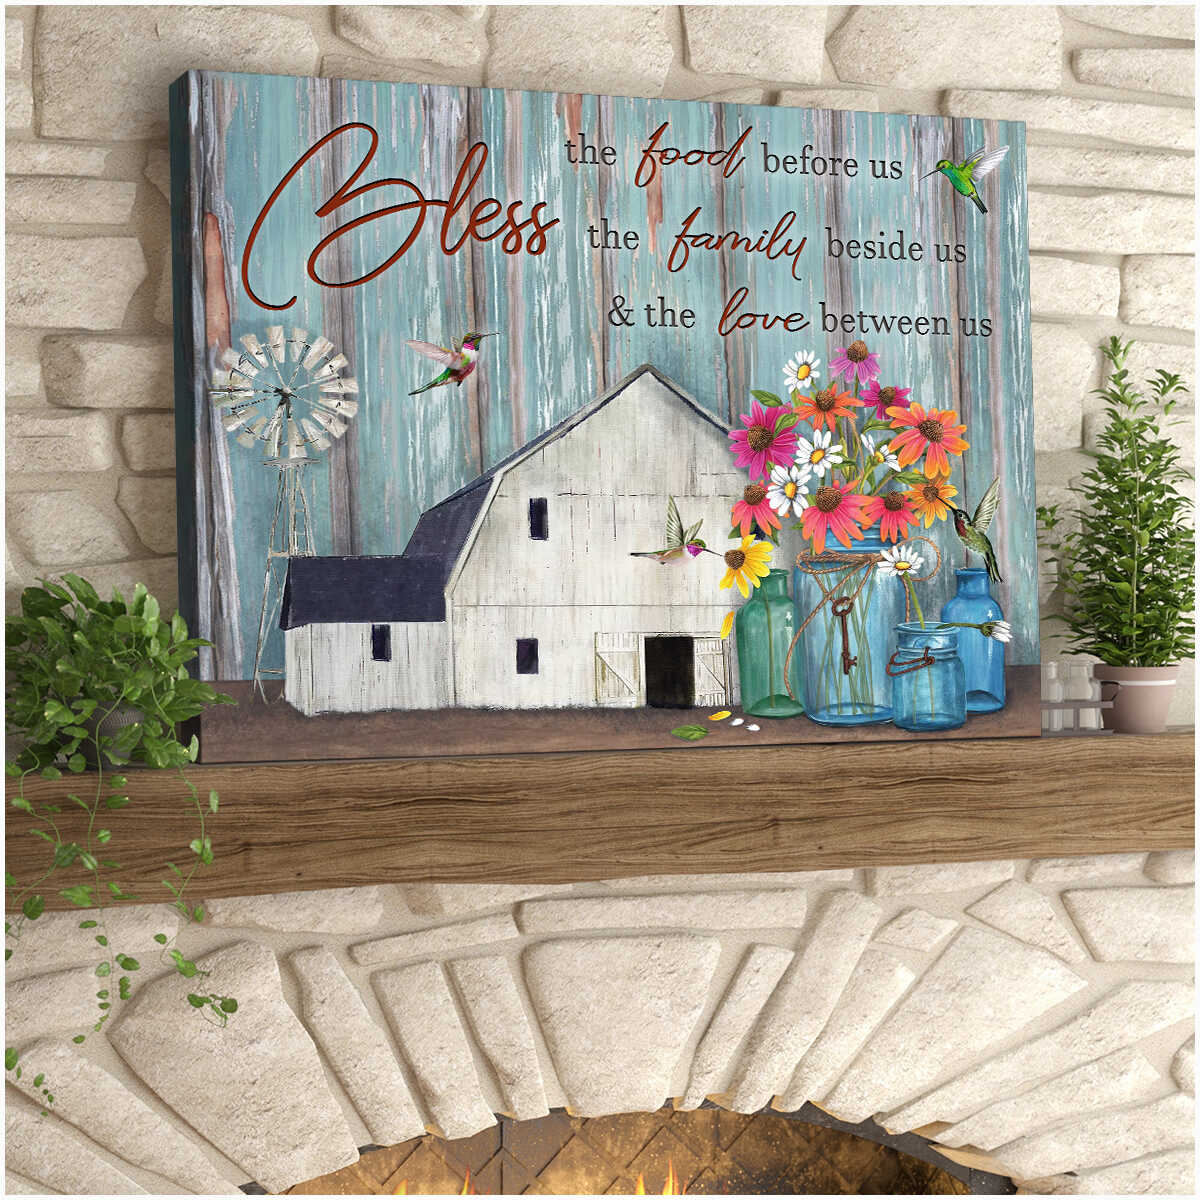 White Barn Bless The Food Before Us The Family Beside Us And The Love Between Us Floral Mason Jars And Hummingbirds Farm Farmhouse Canvas Prints Wall Art Decor